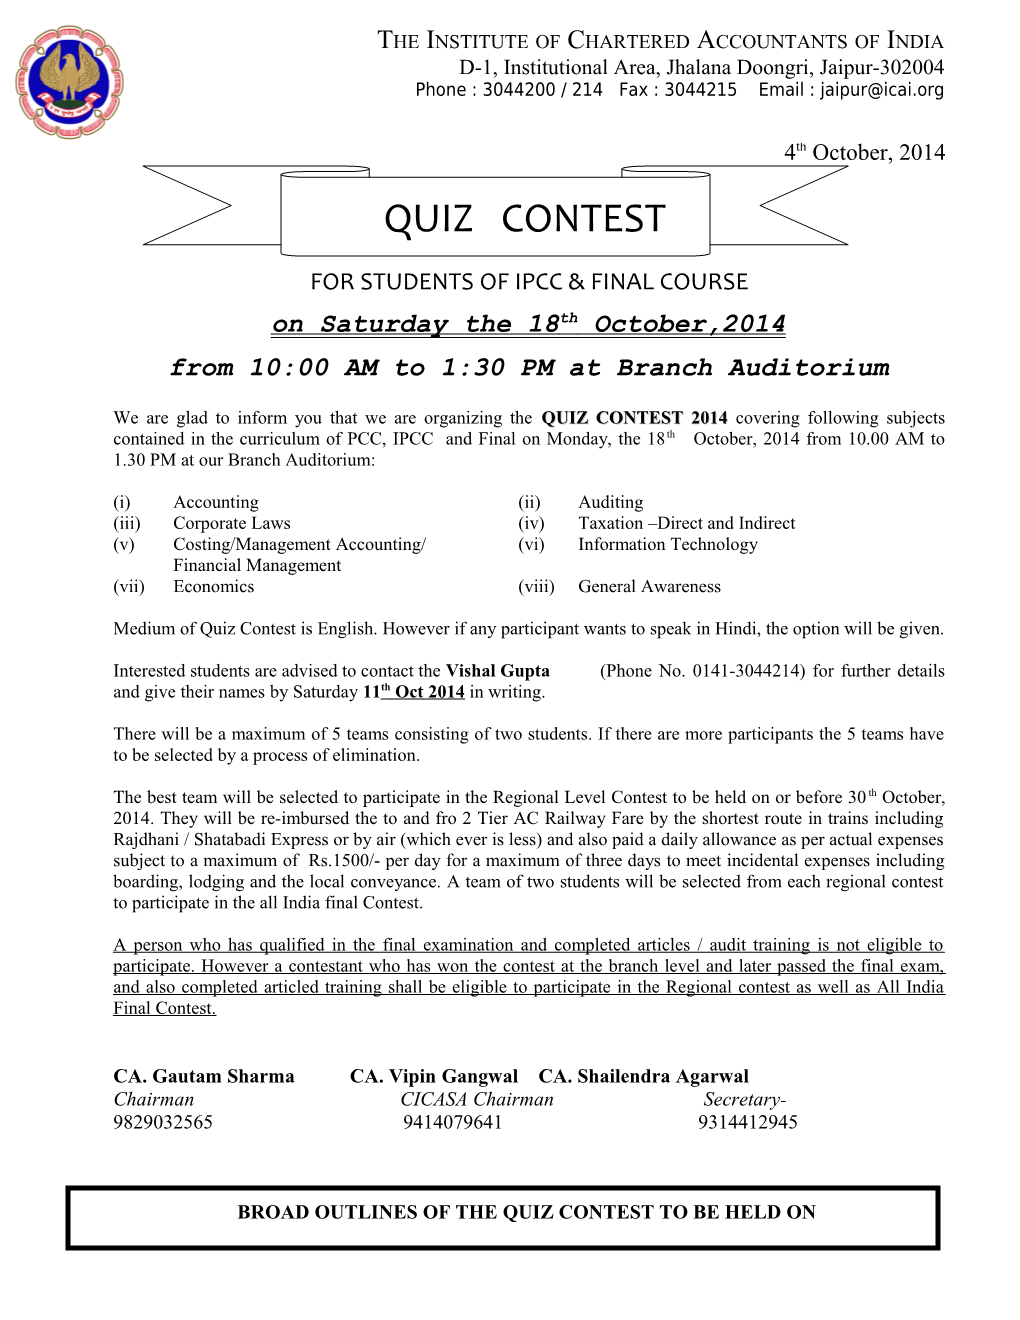 We Are Glad to Inform You That We Are Organizing QUIZ CONTEST Covering Following Subject